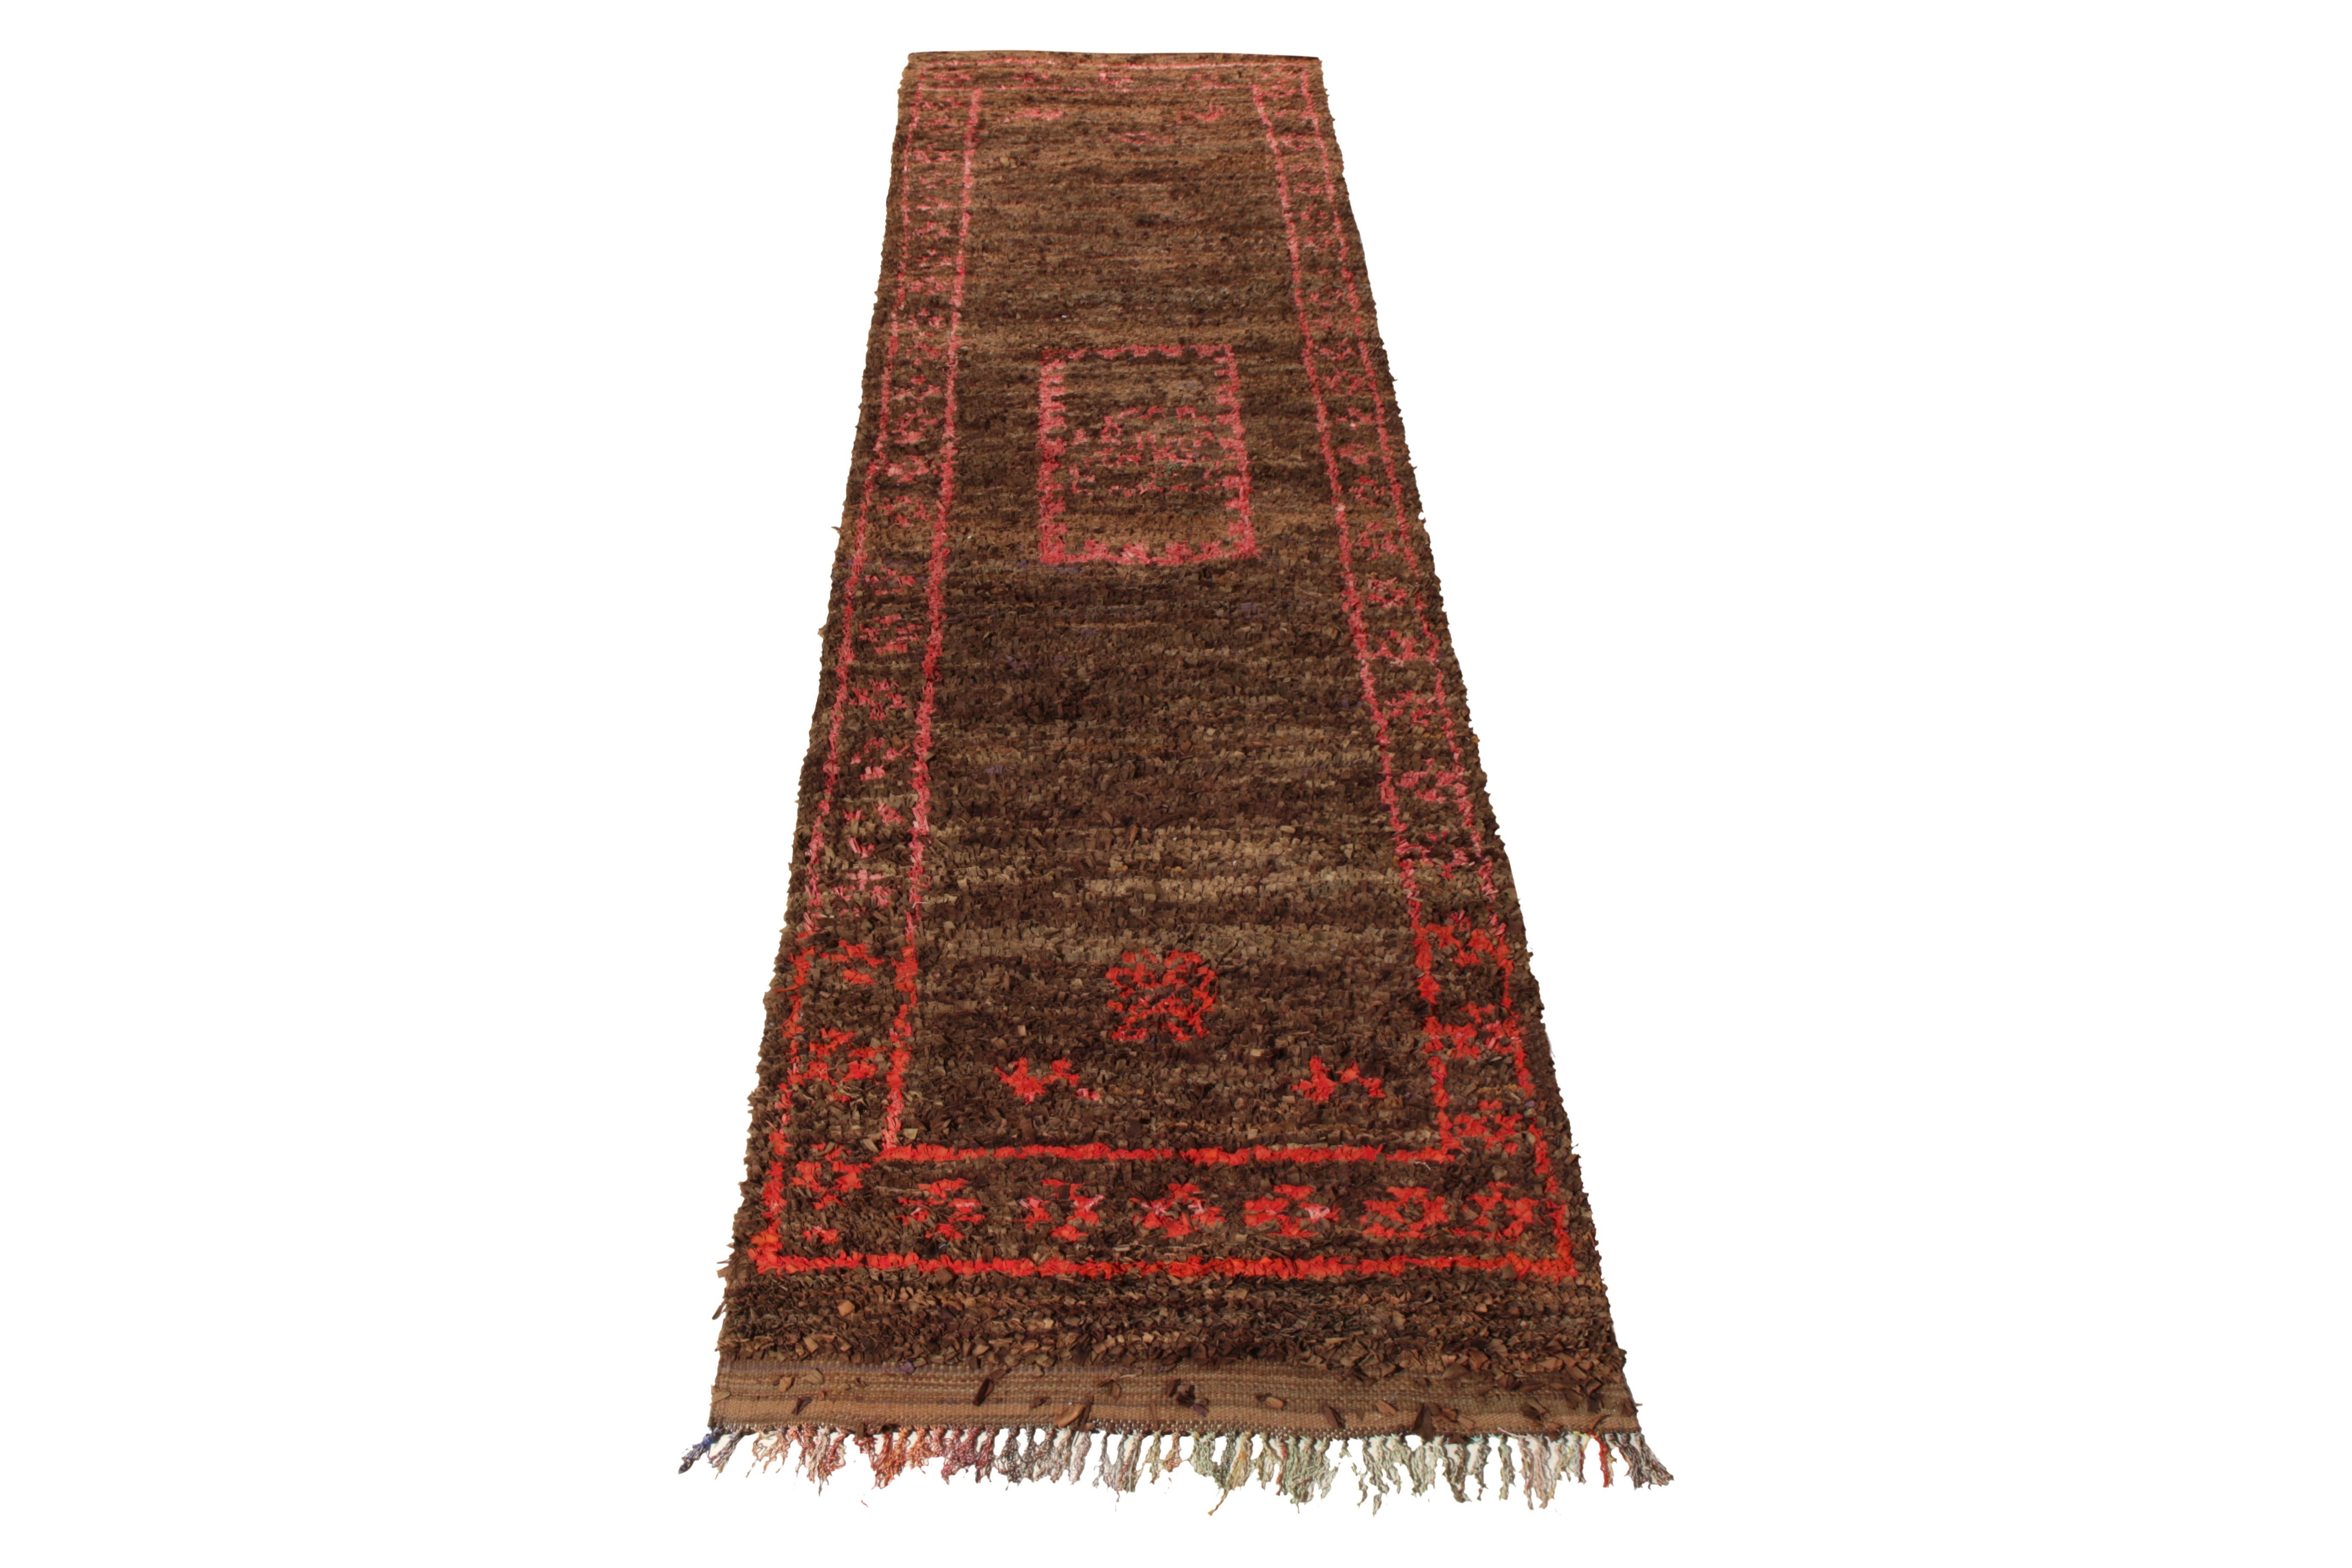 Hand knotted in Boucherouite fabric from Morocco circa 1950-1960, a vintage 4x13 Berber style Moroccan runner enjoying a unique colorway and medallion pattern. With tribal touches prevailing in the geometry, this pallet enjoys a warm red and pink